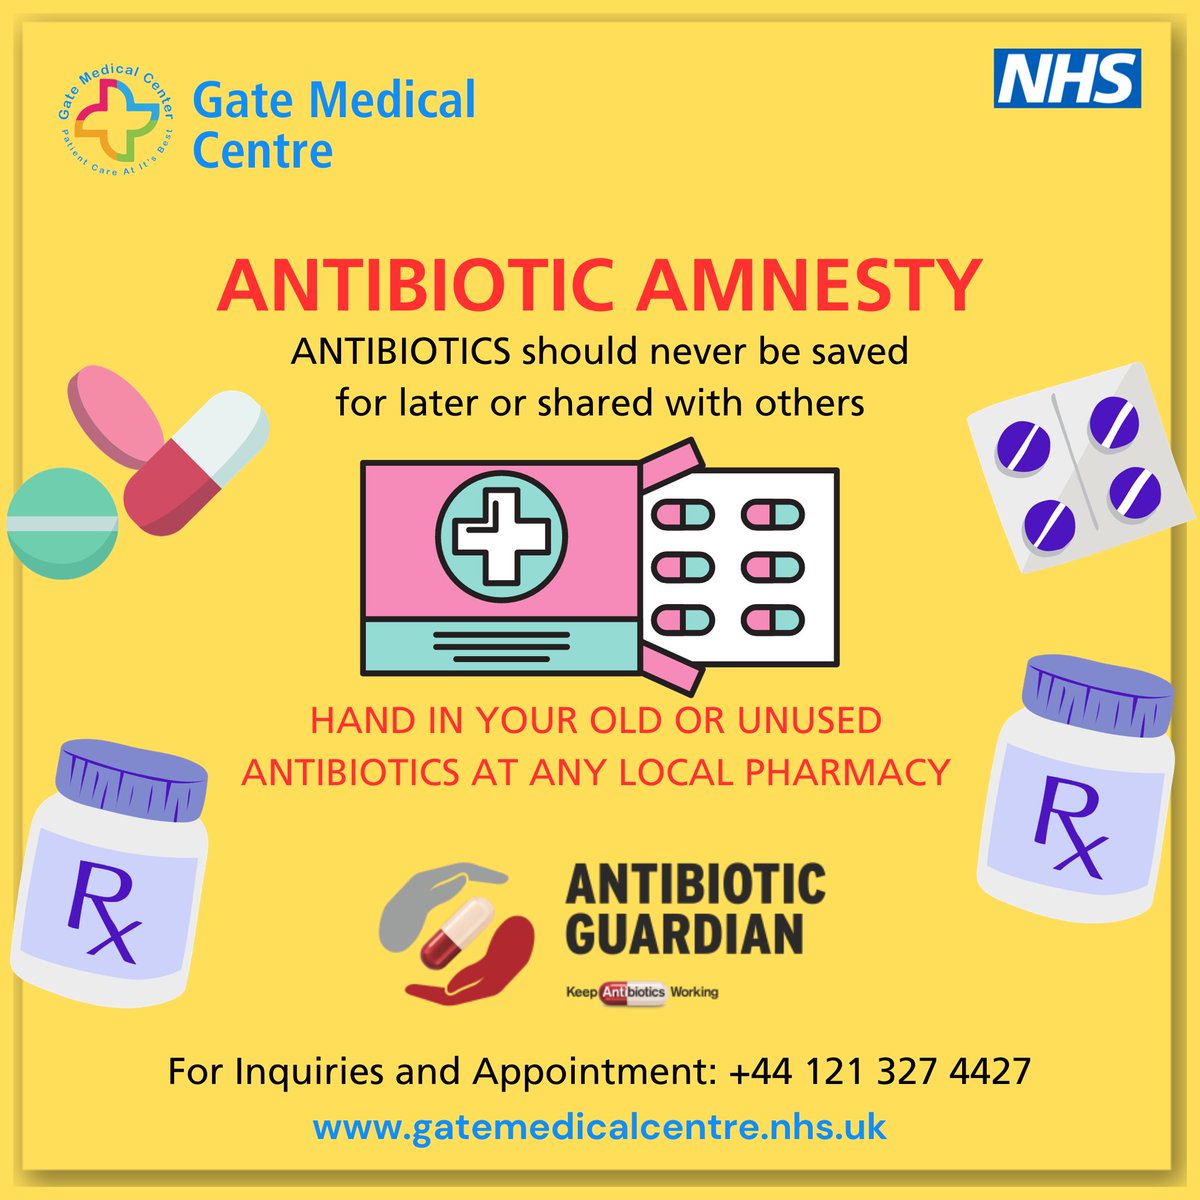 An #AntibioticAmnesty is being held this month.
💊 You can help us keep antibiotics working by taking your old or unused antibiotics to a local pharmacy, where they will be disposed of safely.
#gatemedicalcentre #NHS #uk #antibiotic #healthcare